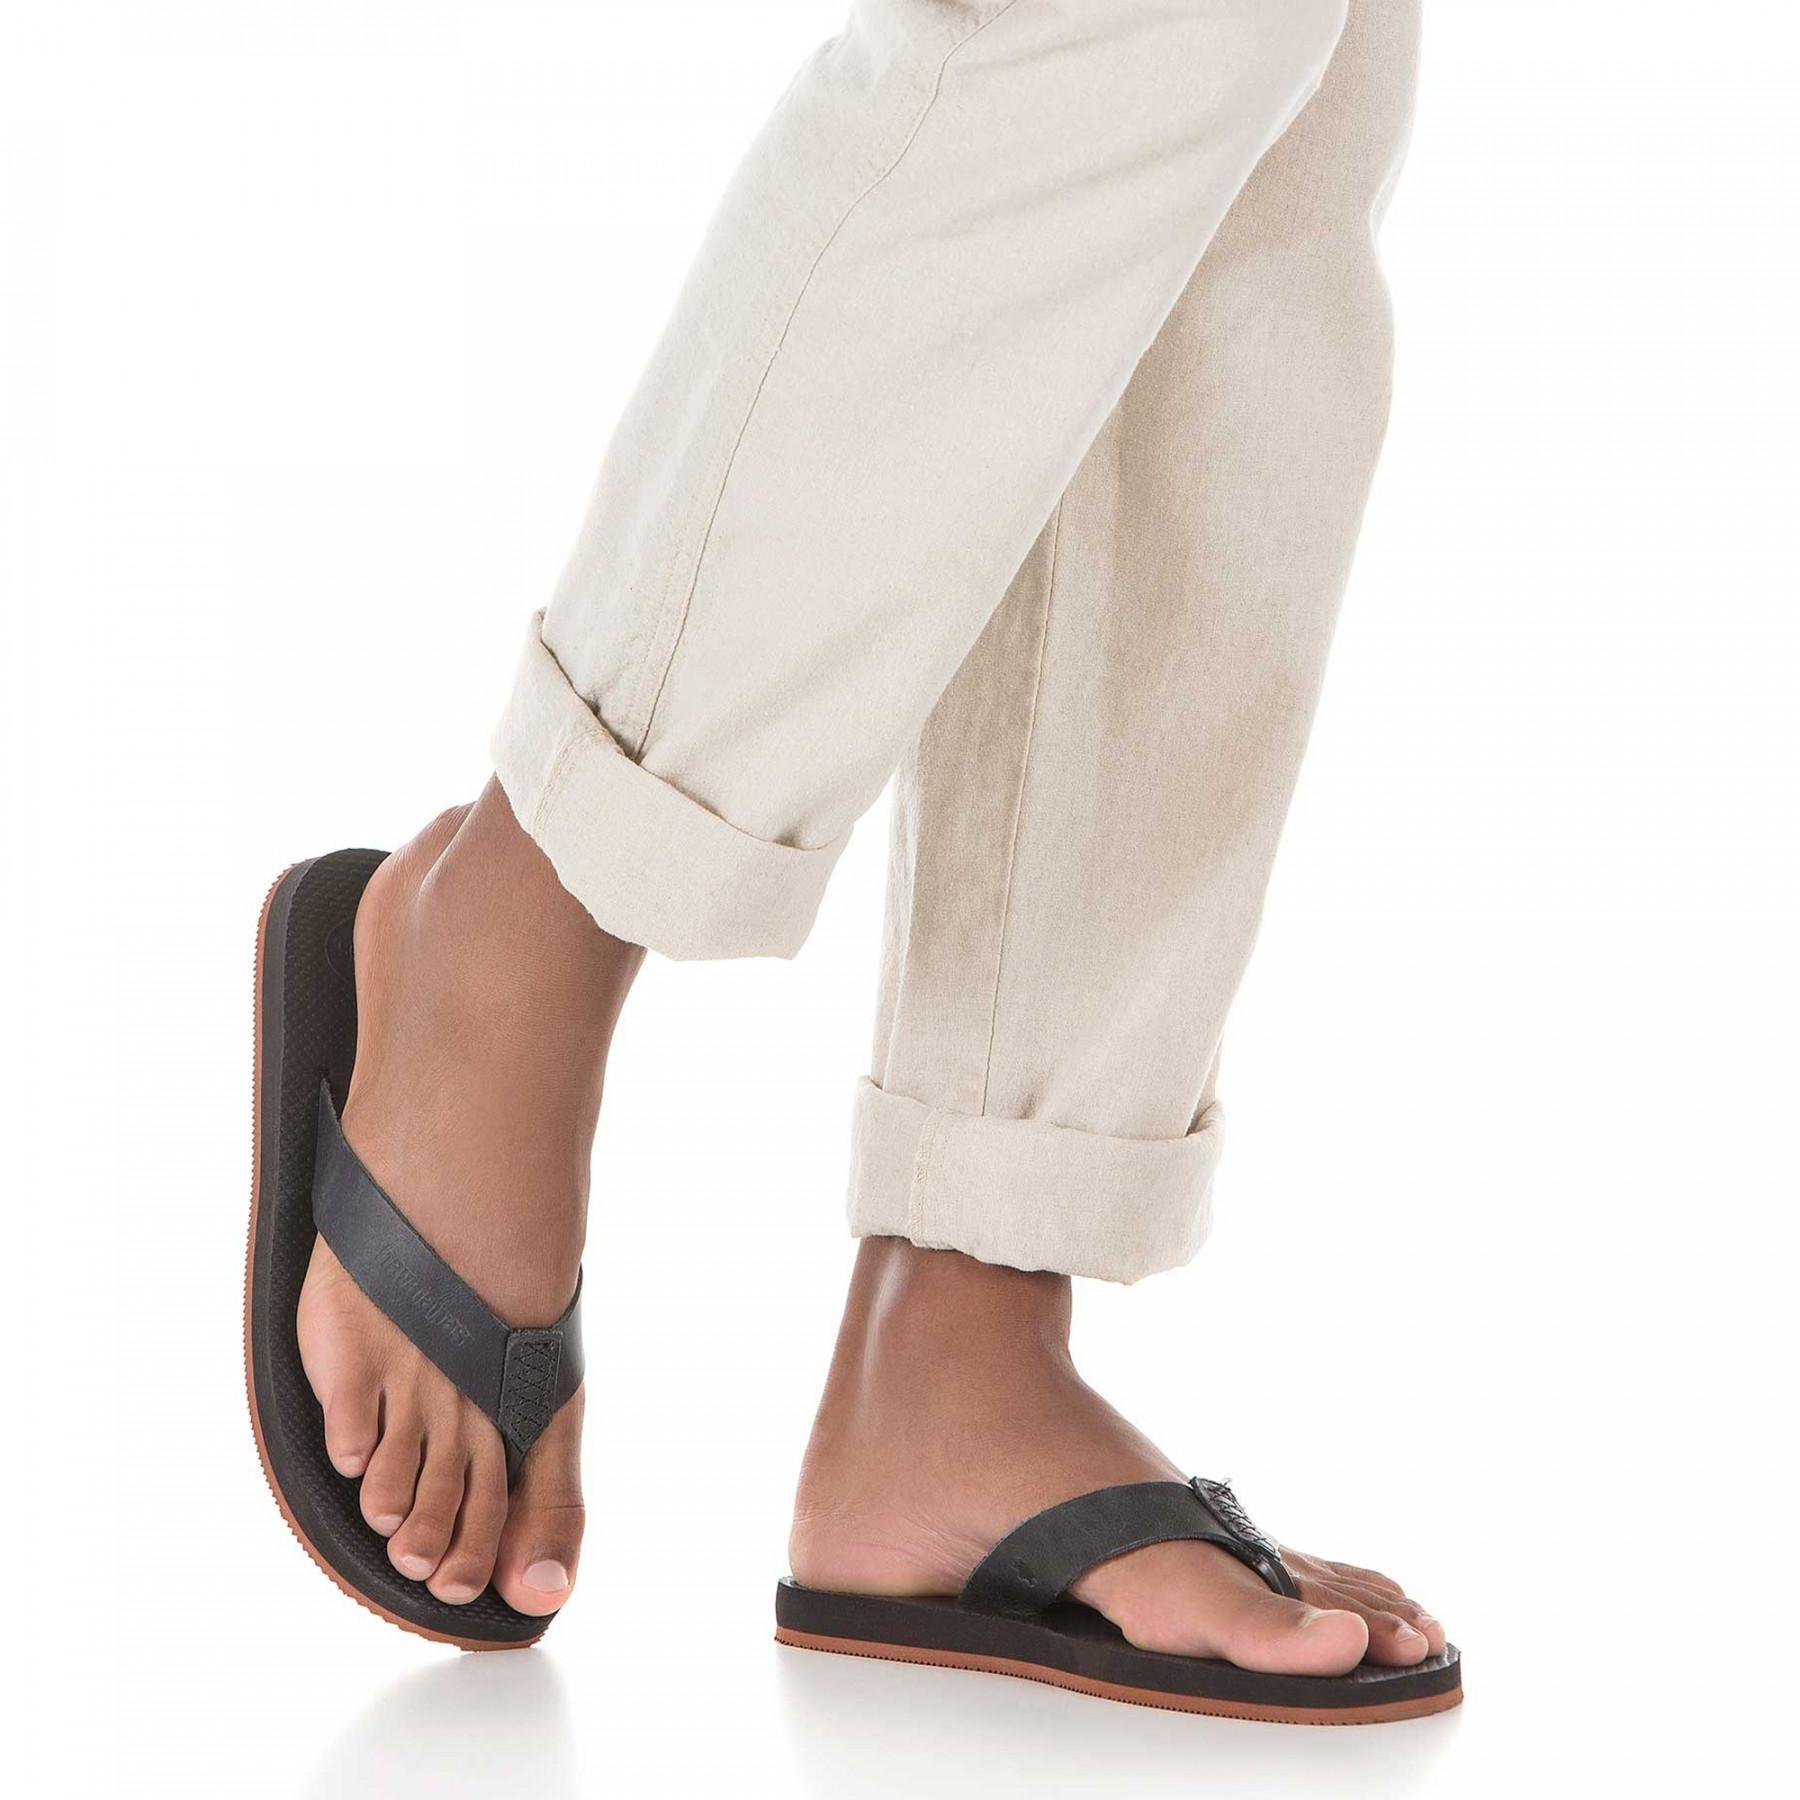 Slippers Havaianas Urban Special